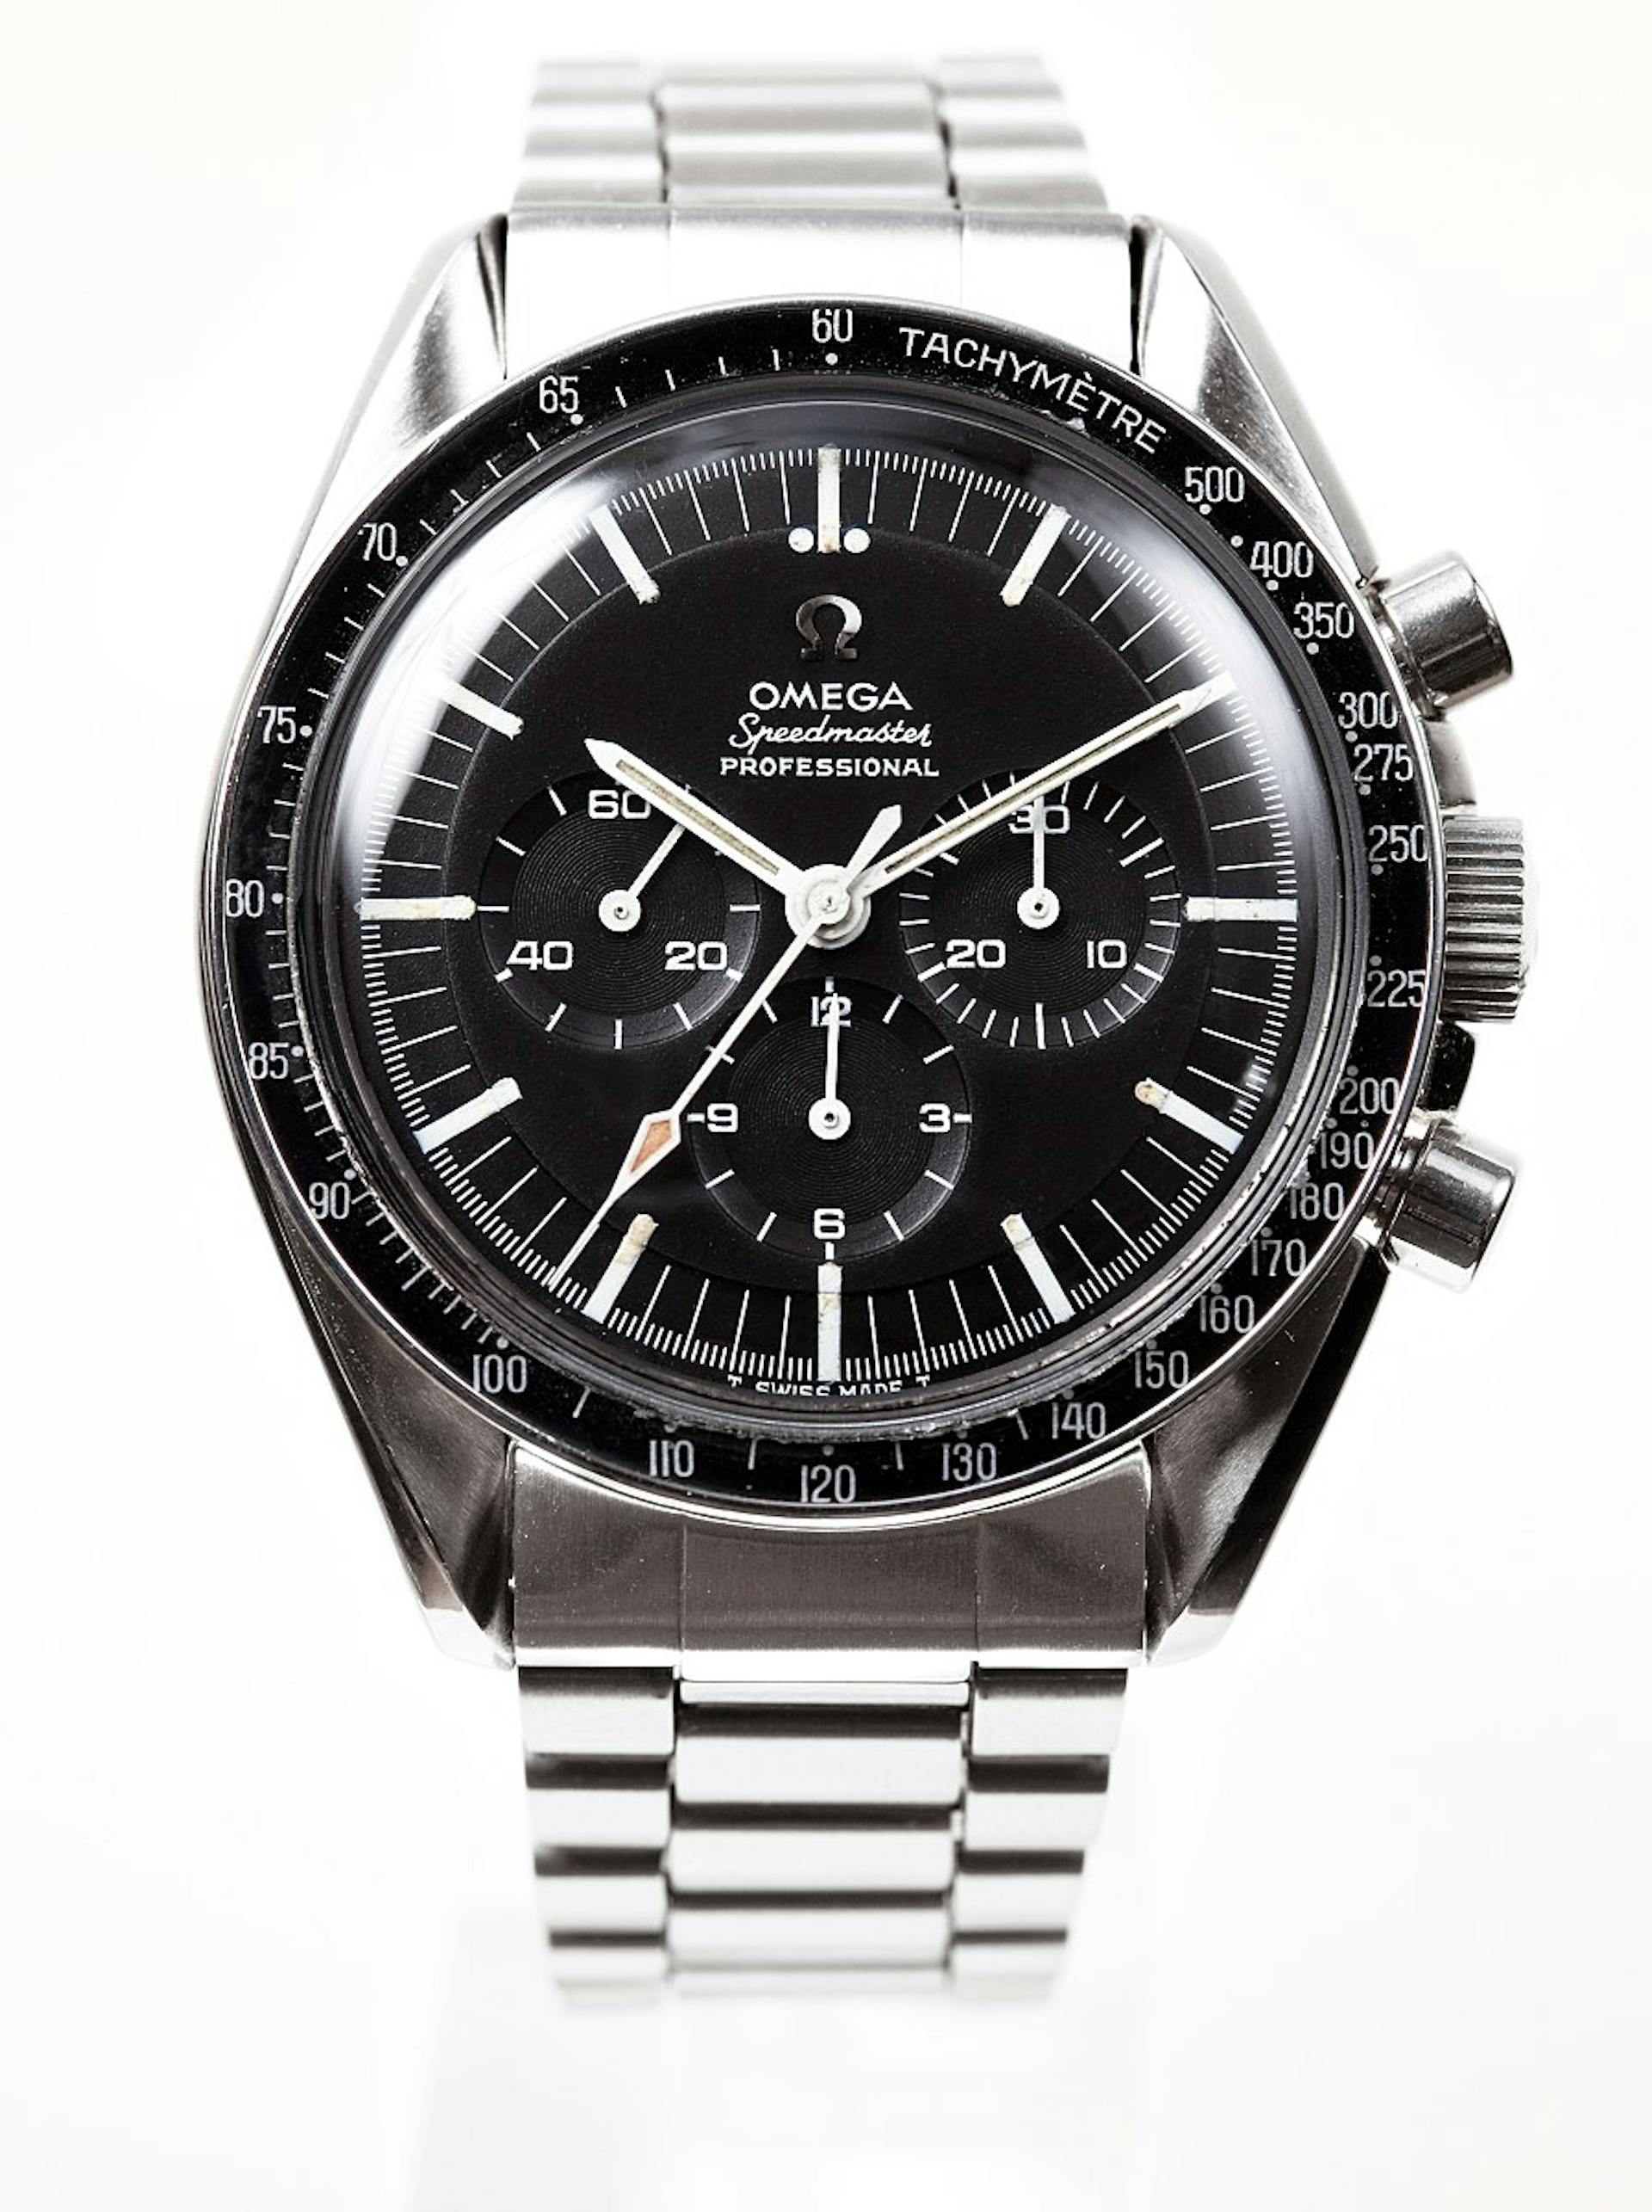 A vintage Omega Speedmaster with the Tachmyeter on the outer Bezel of the watch.